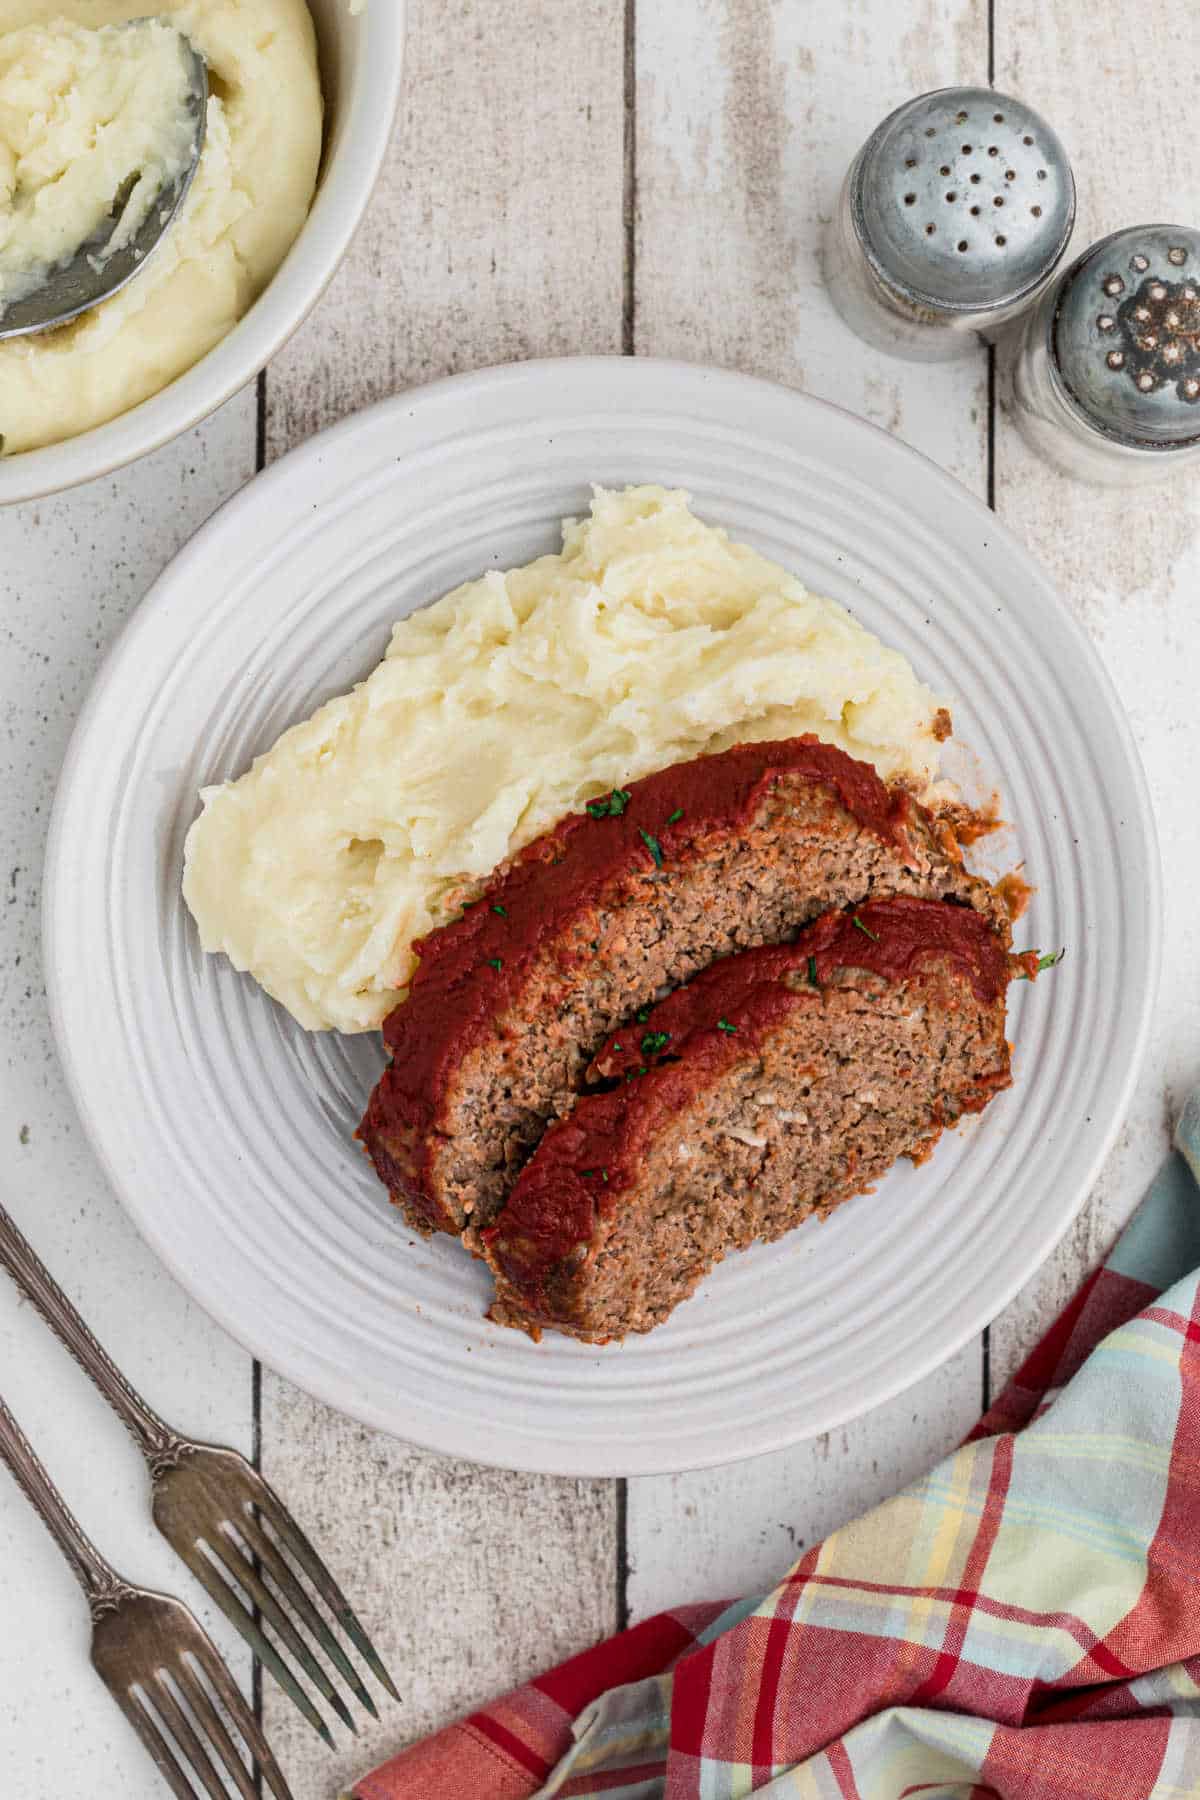 Overhead shot of a plate of mashed potatoes with meatloaf.